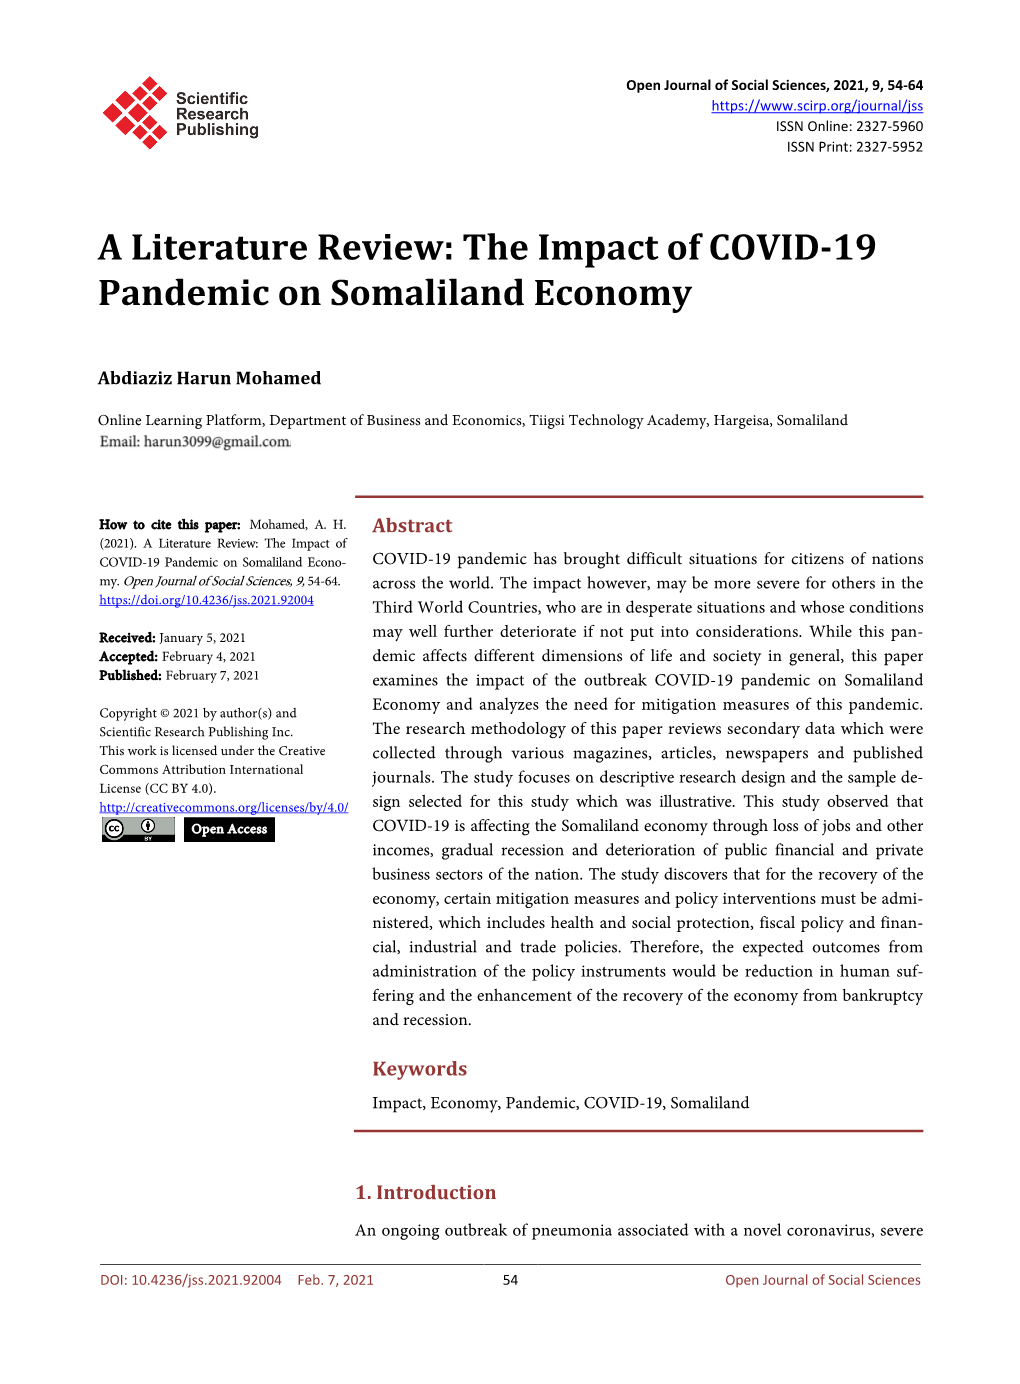 The Impact of COVID-19 Pandemic on Somaliland Economy